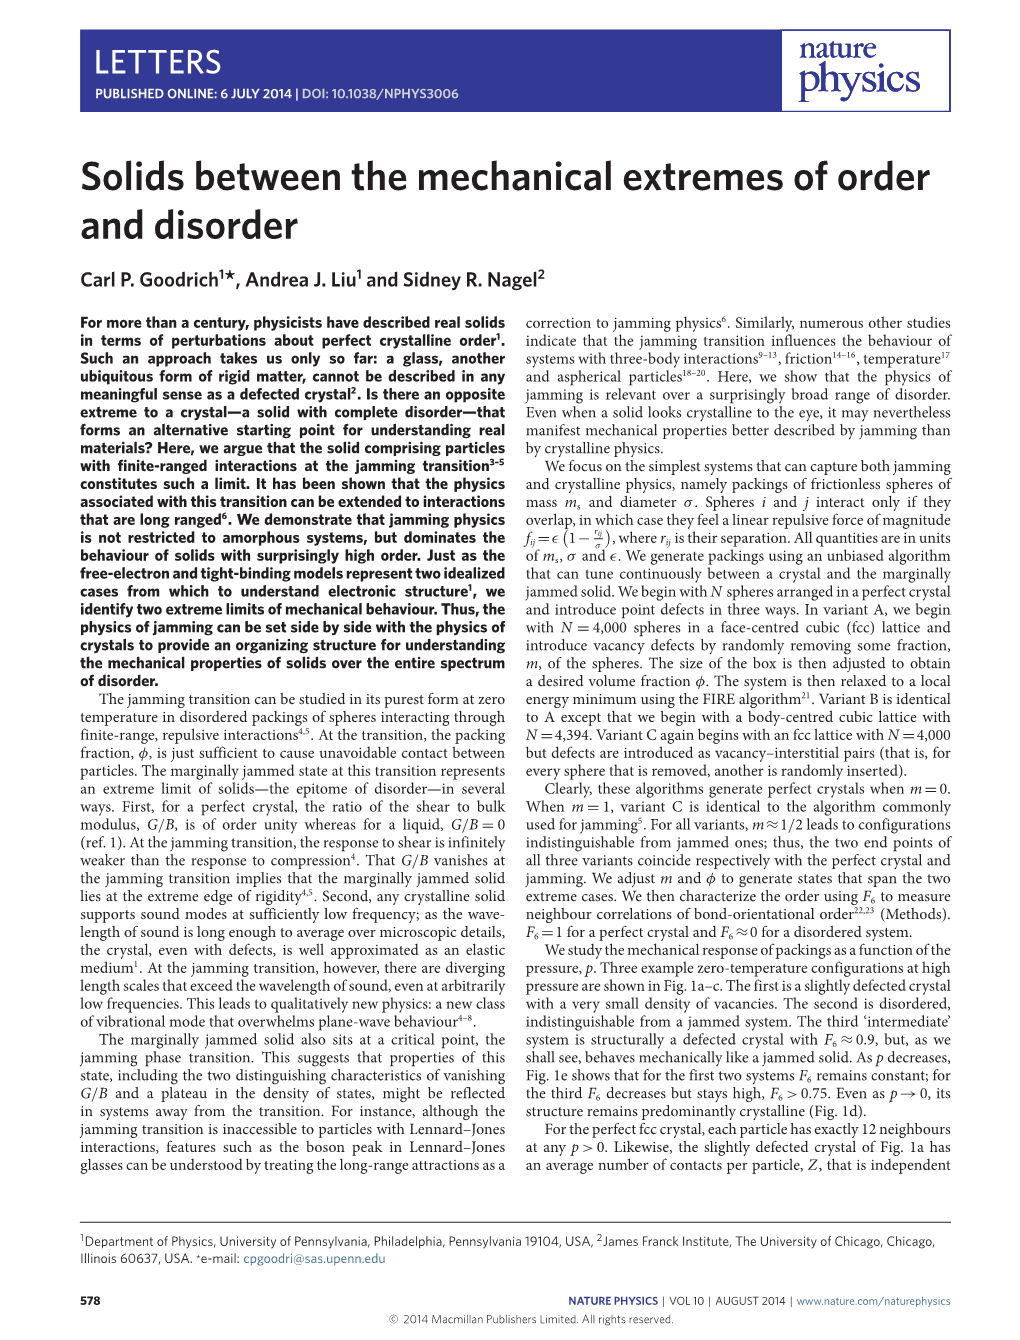 Solids Between the Mechanical Extremes of Order and Disorder Carl P